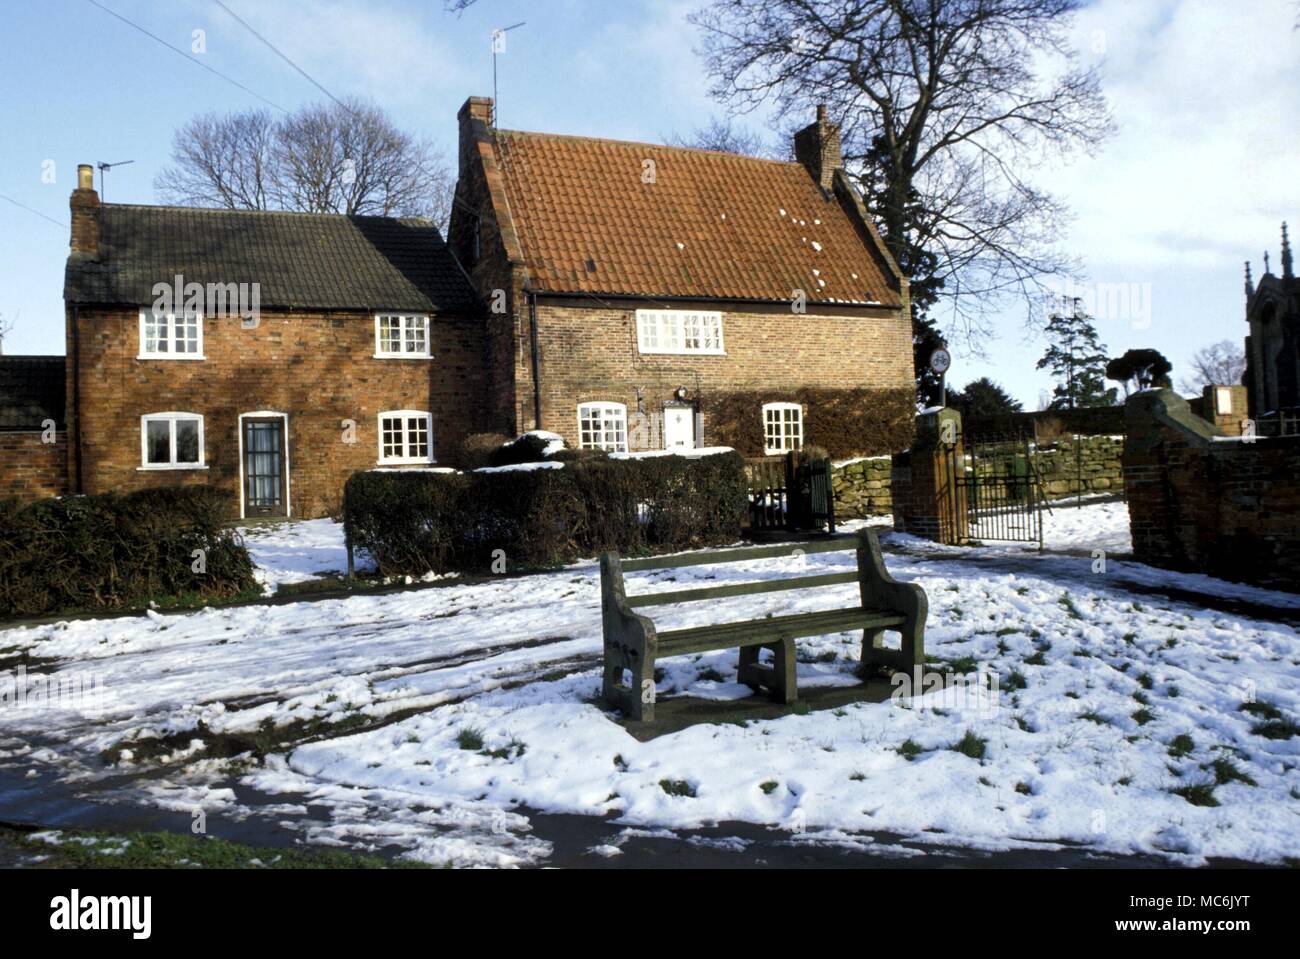 WITCHCRAFT - Houses in Bottesford, one of the English witchcraft villages in the 17th century Stock Photo